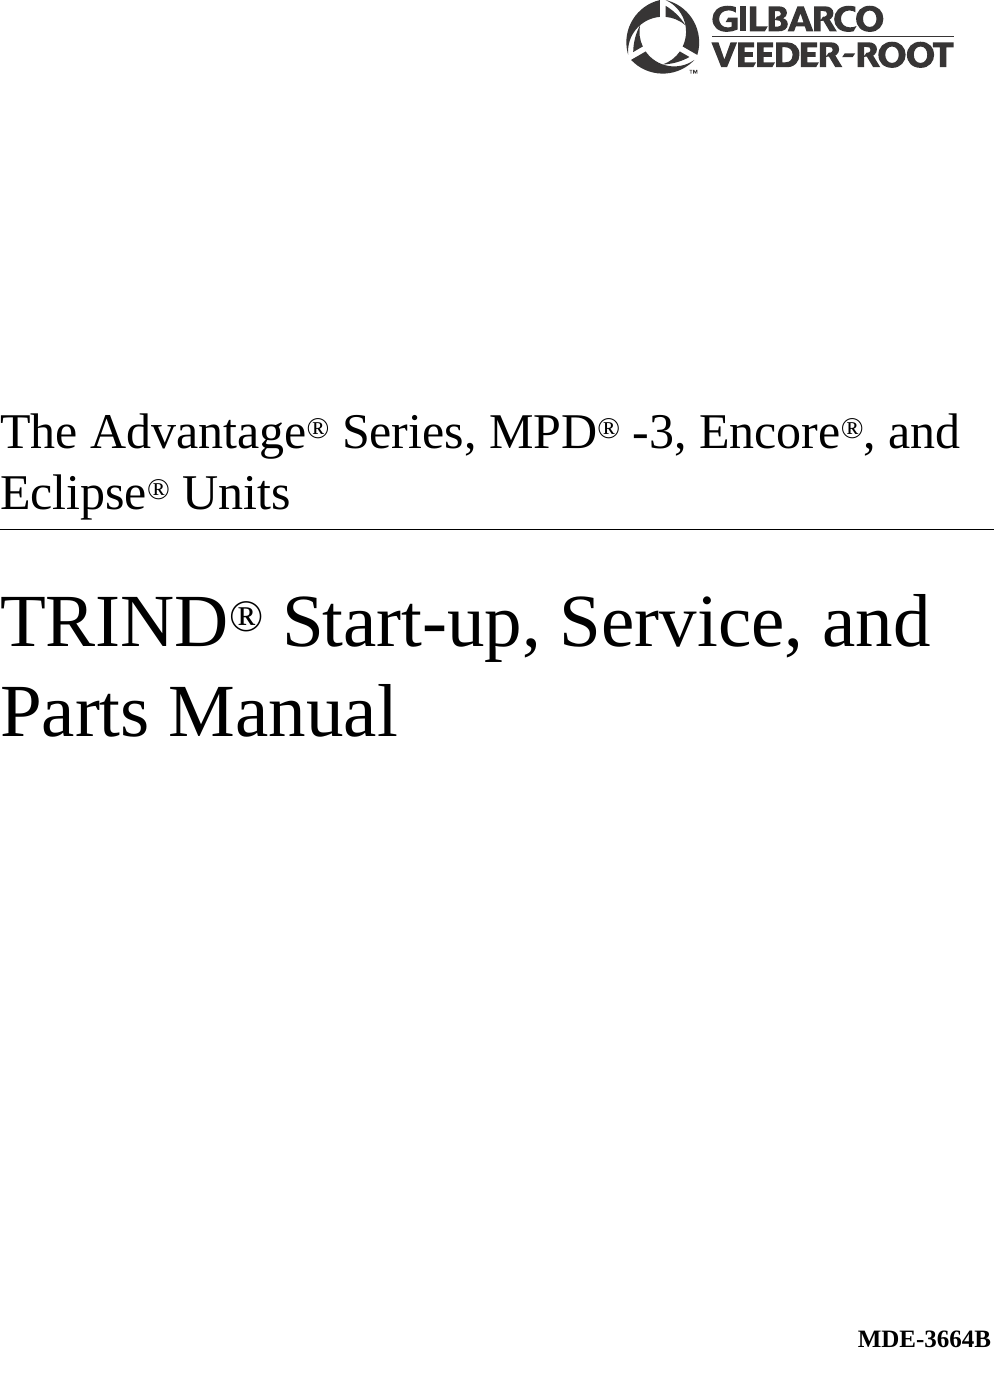 The Advantage® Series, MPD® -3, Encore®, and Eclipse® Units TRIND® Start-up, Service, and Parts ManualMDE-3664B